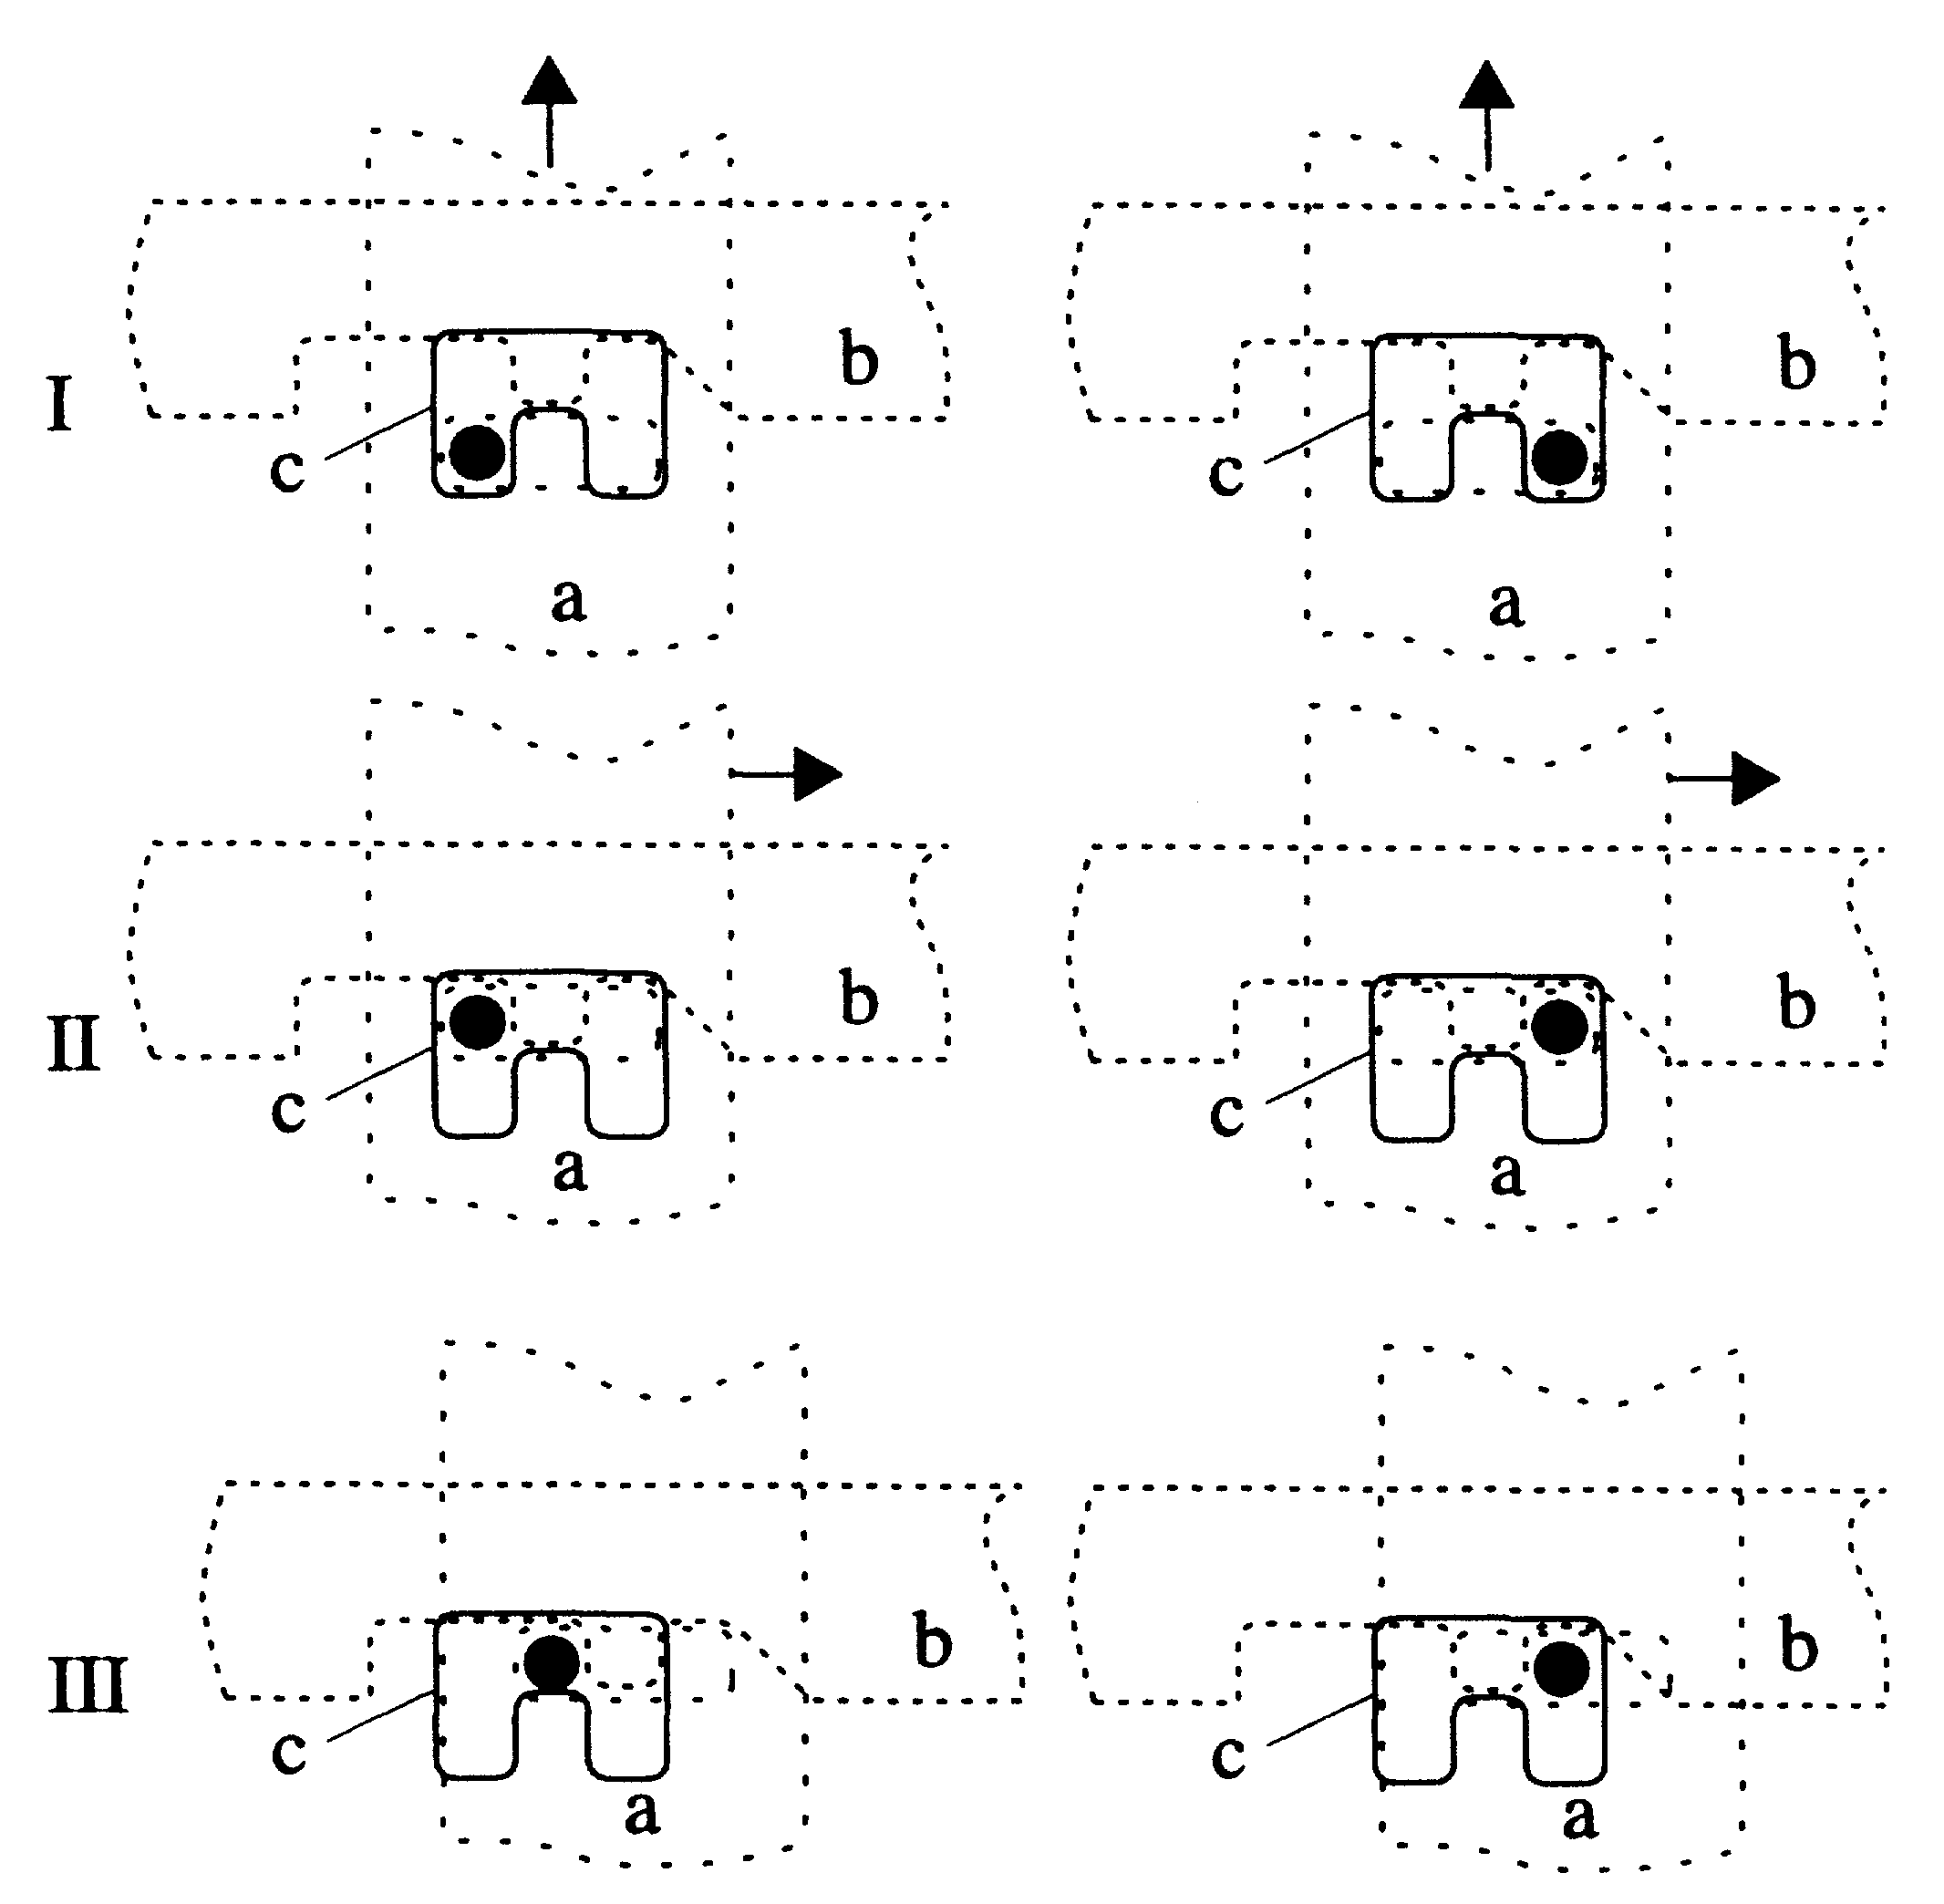 Image 6, showing first three stages of the read cycle, for both values 0 and 1